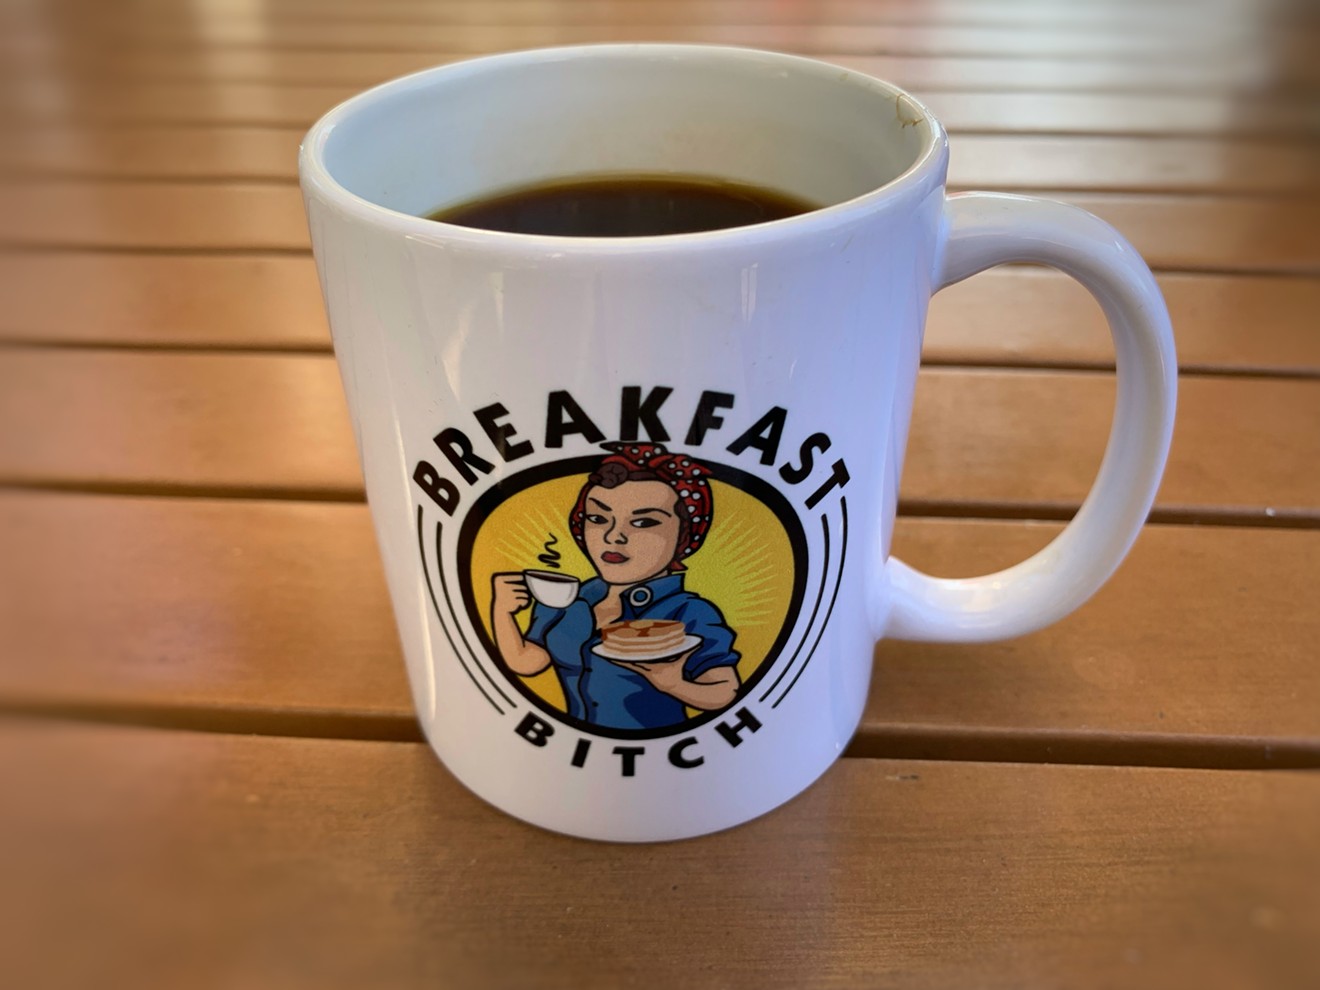 Breakfast Bitch is opening a location at Third and Roosevelt Streets.